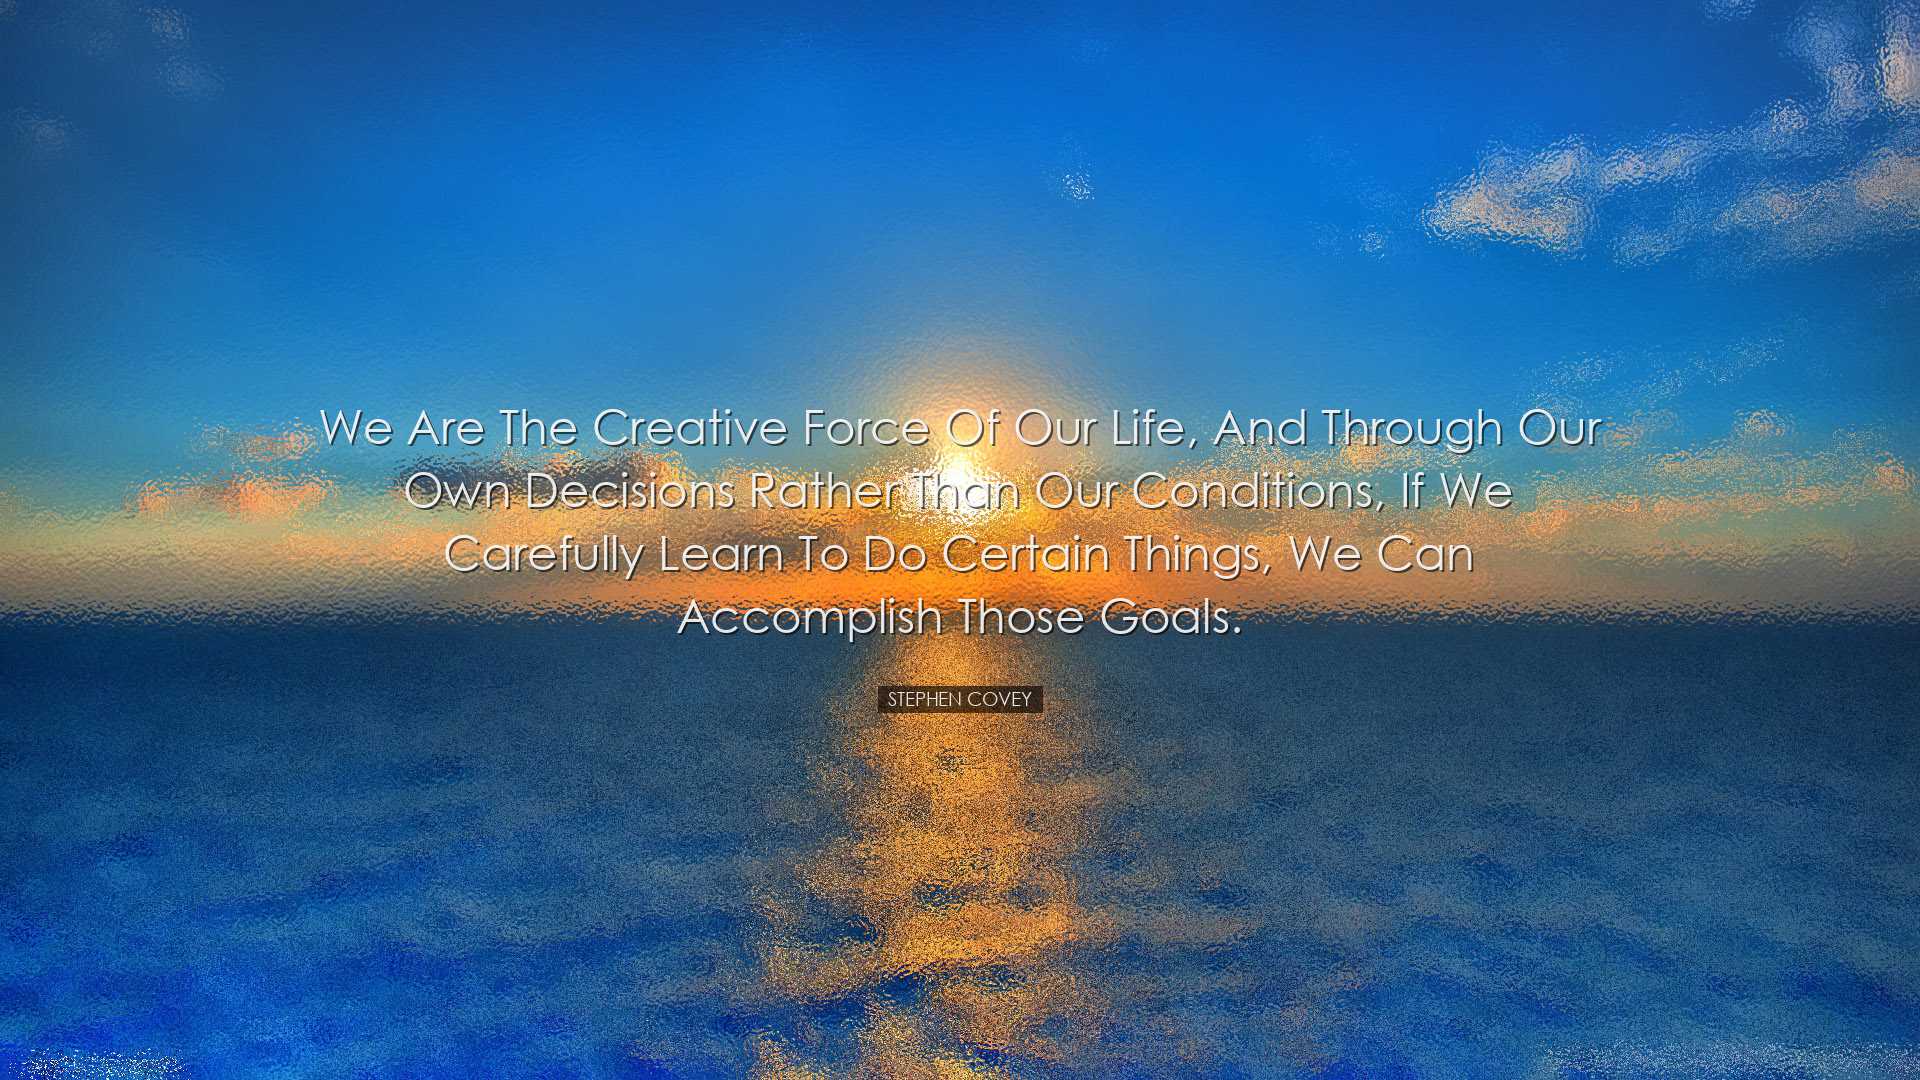 We are the creative force of our life, and through our own decisio